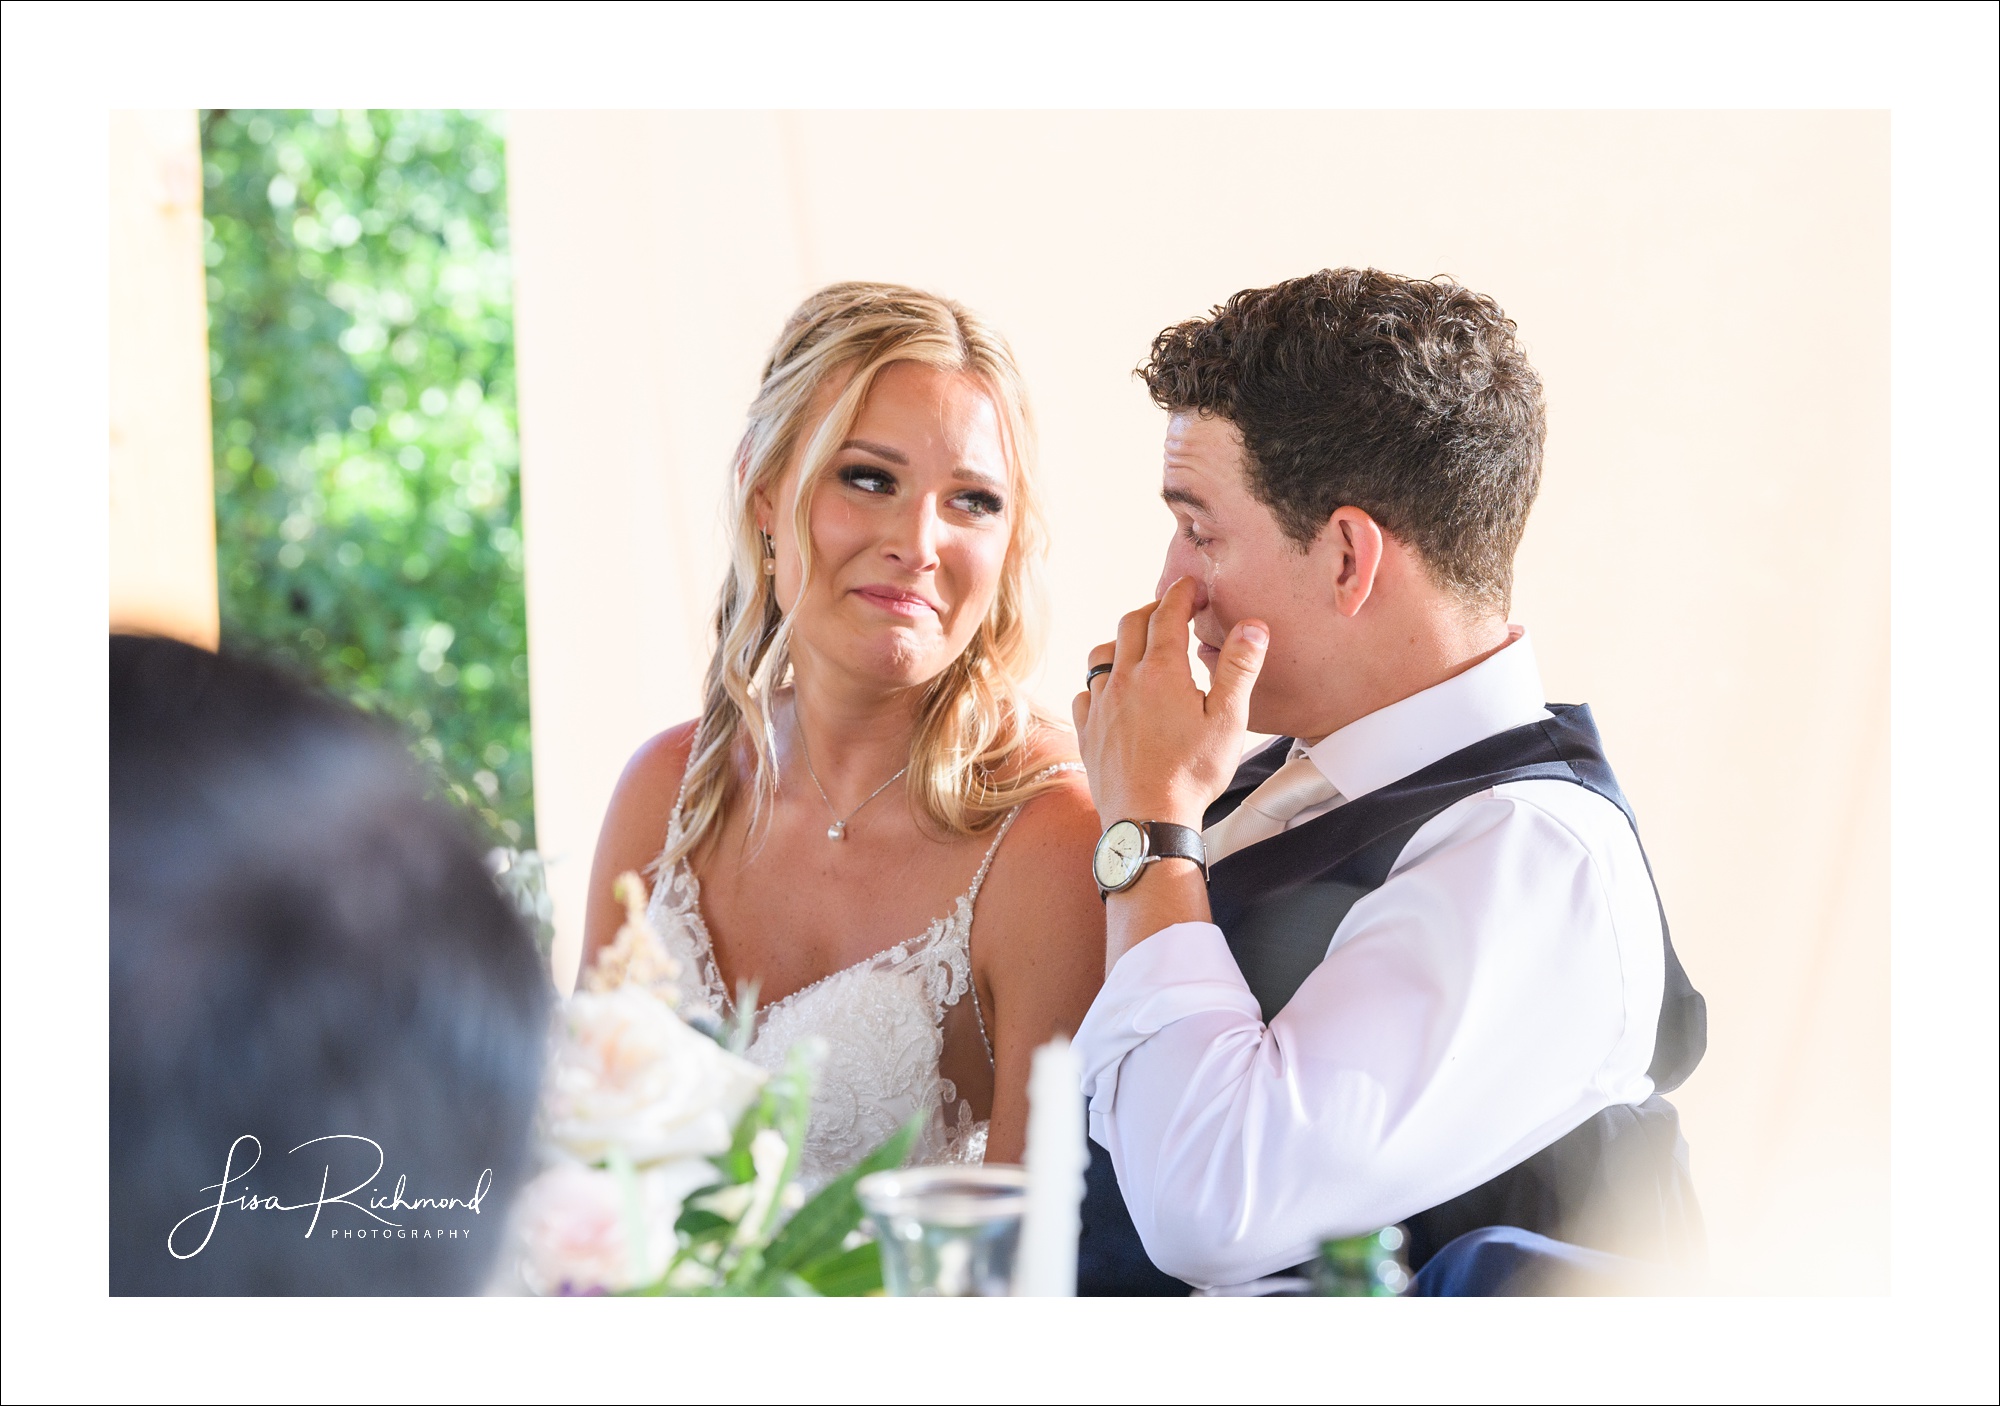 Derek and Brittany- Timing is everything!